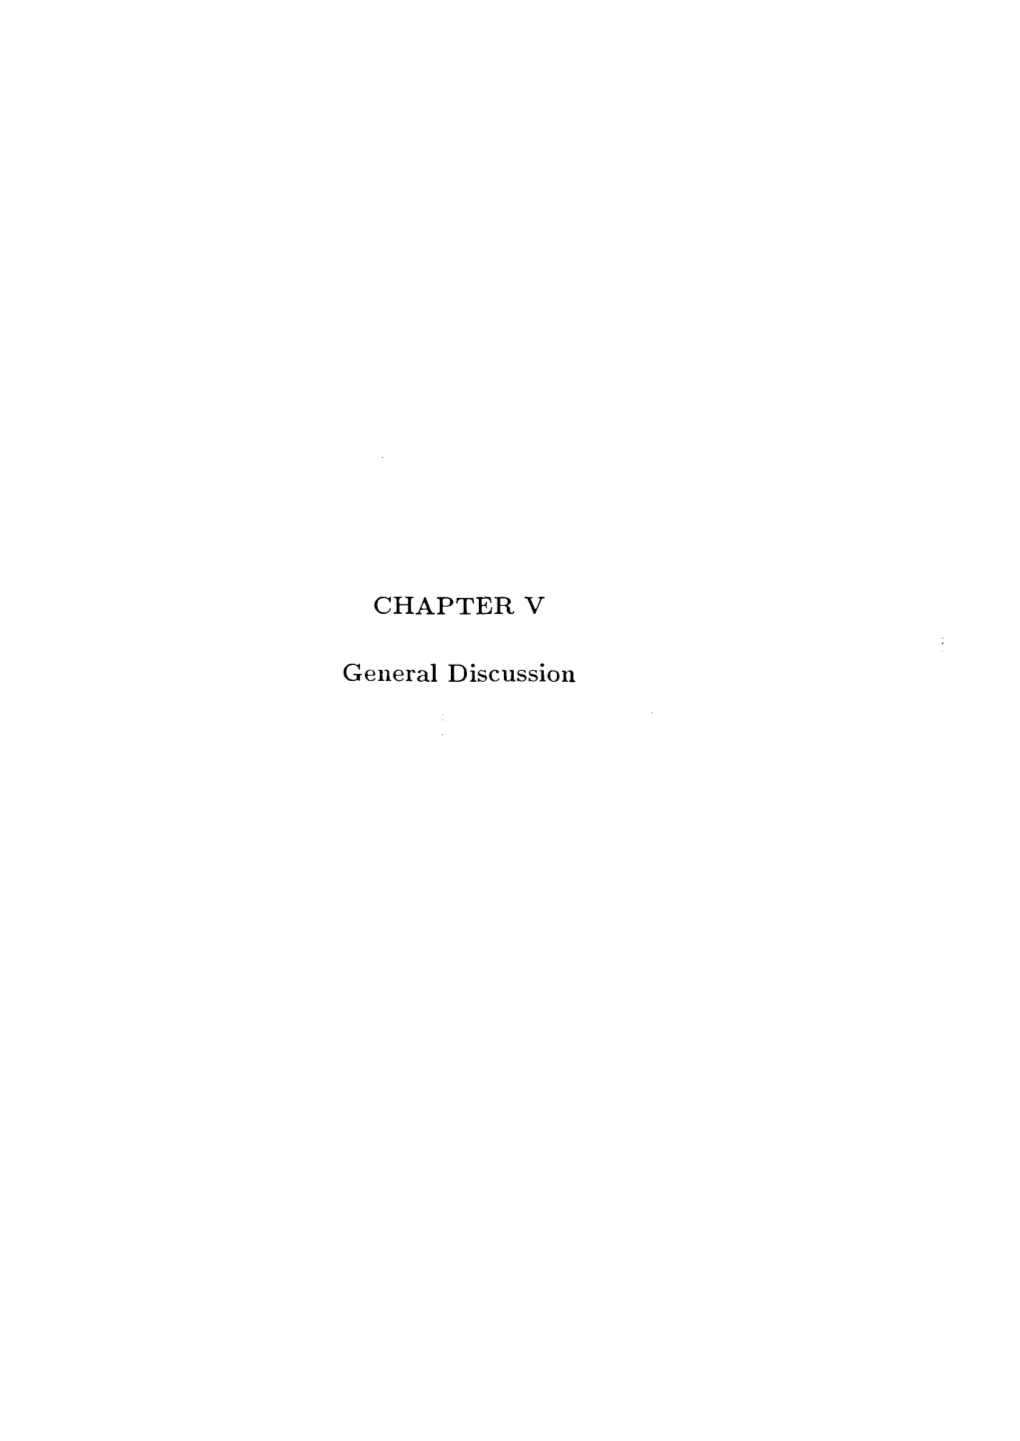 CHAPTER V General Discussion